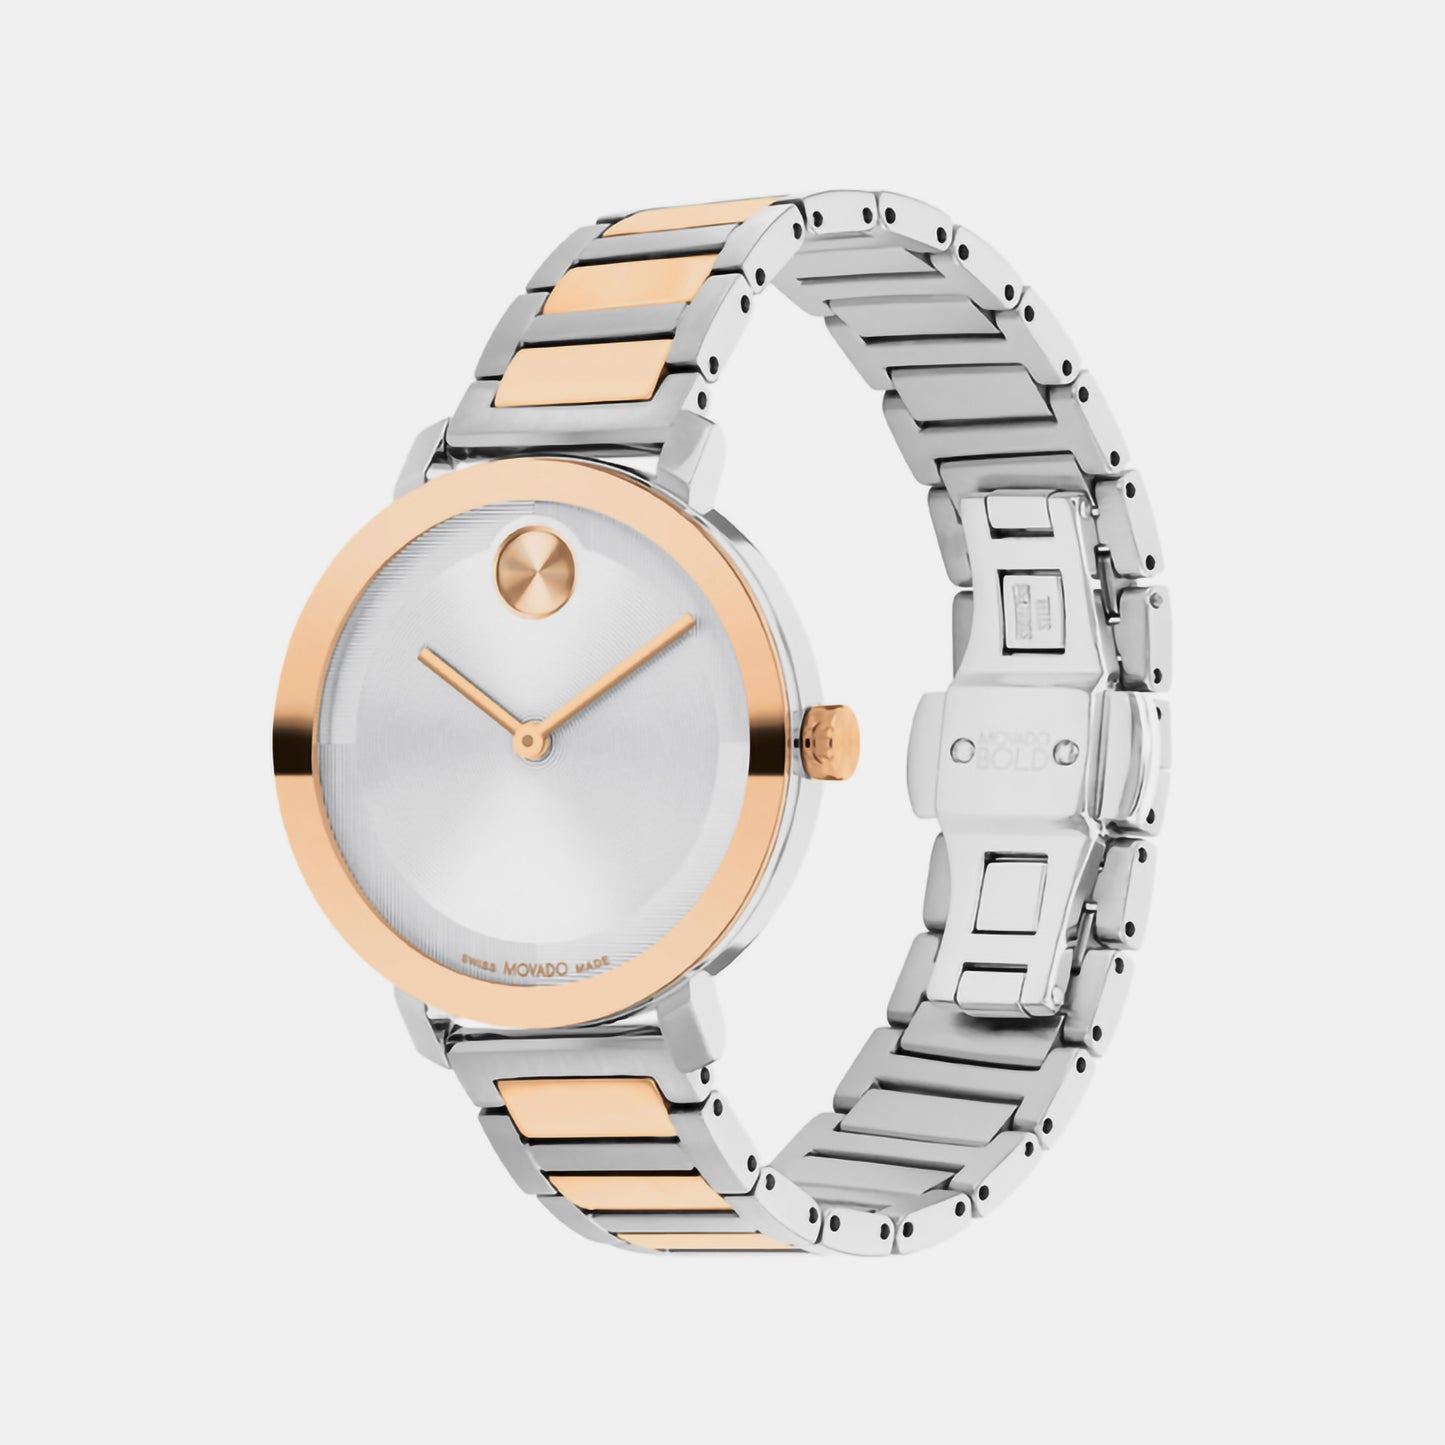 Bold Female Silver Analog Stainless Steel Watch 3601141